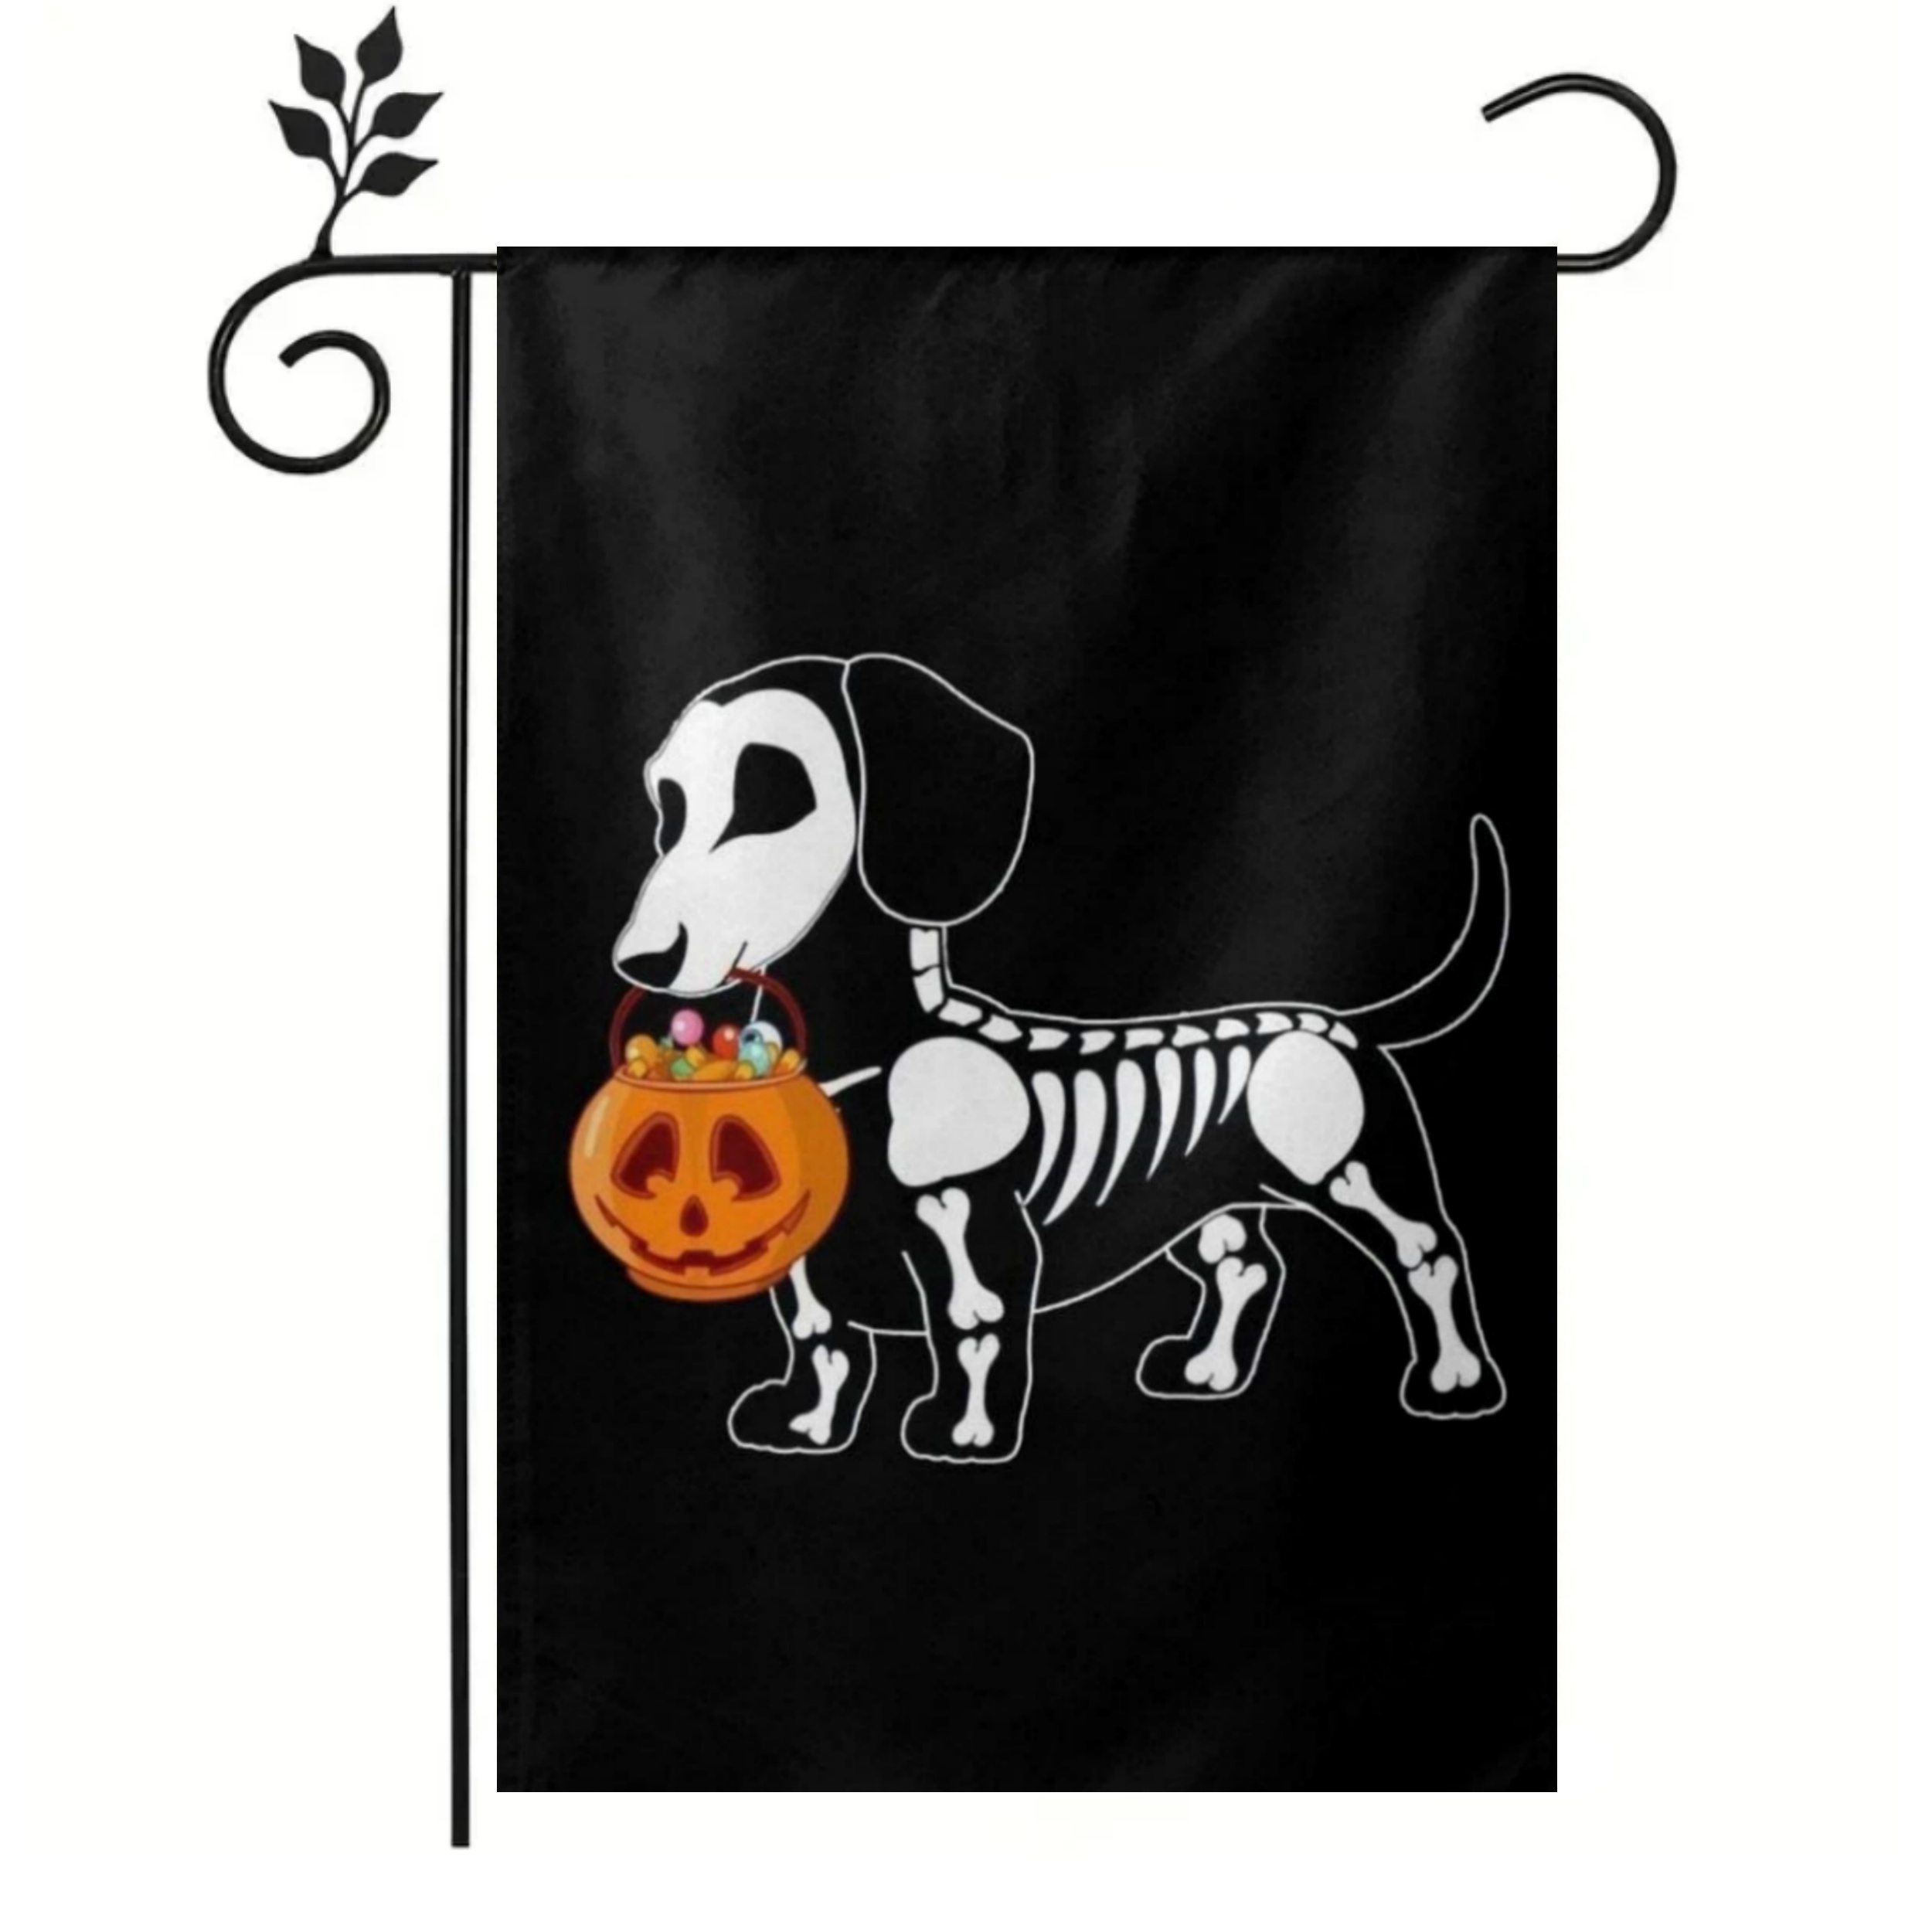 1pc fright on halloween night garden flag fall witch trick or treat spooky black dog season autumntime pumpkin house banner small yard gift small double sided burlap 12 18in halloween party gifts for families friends